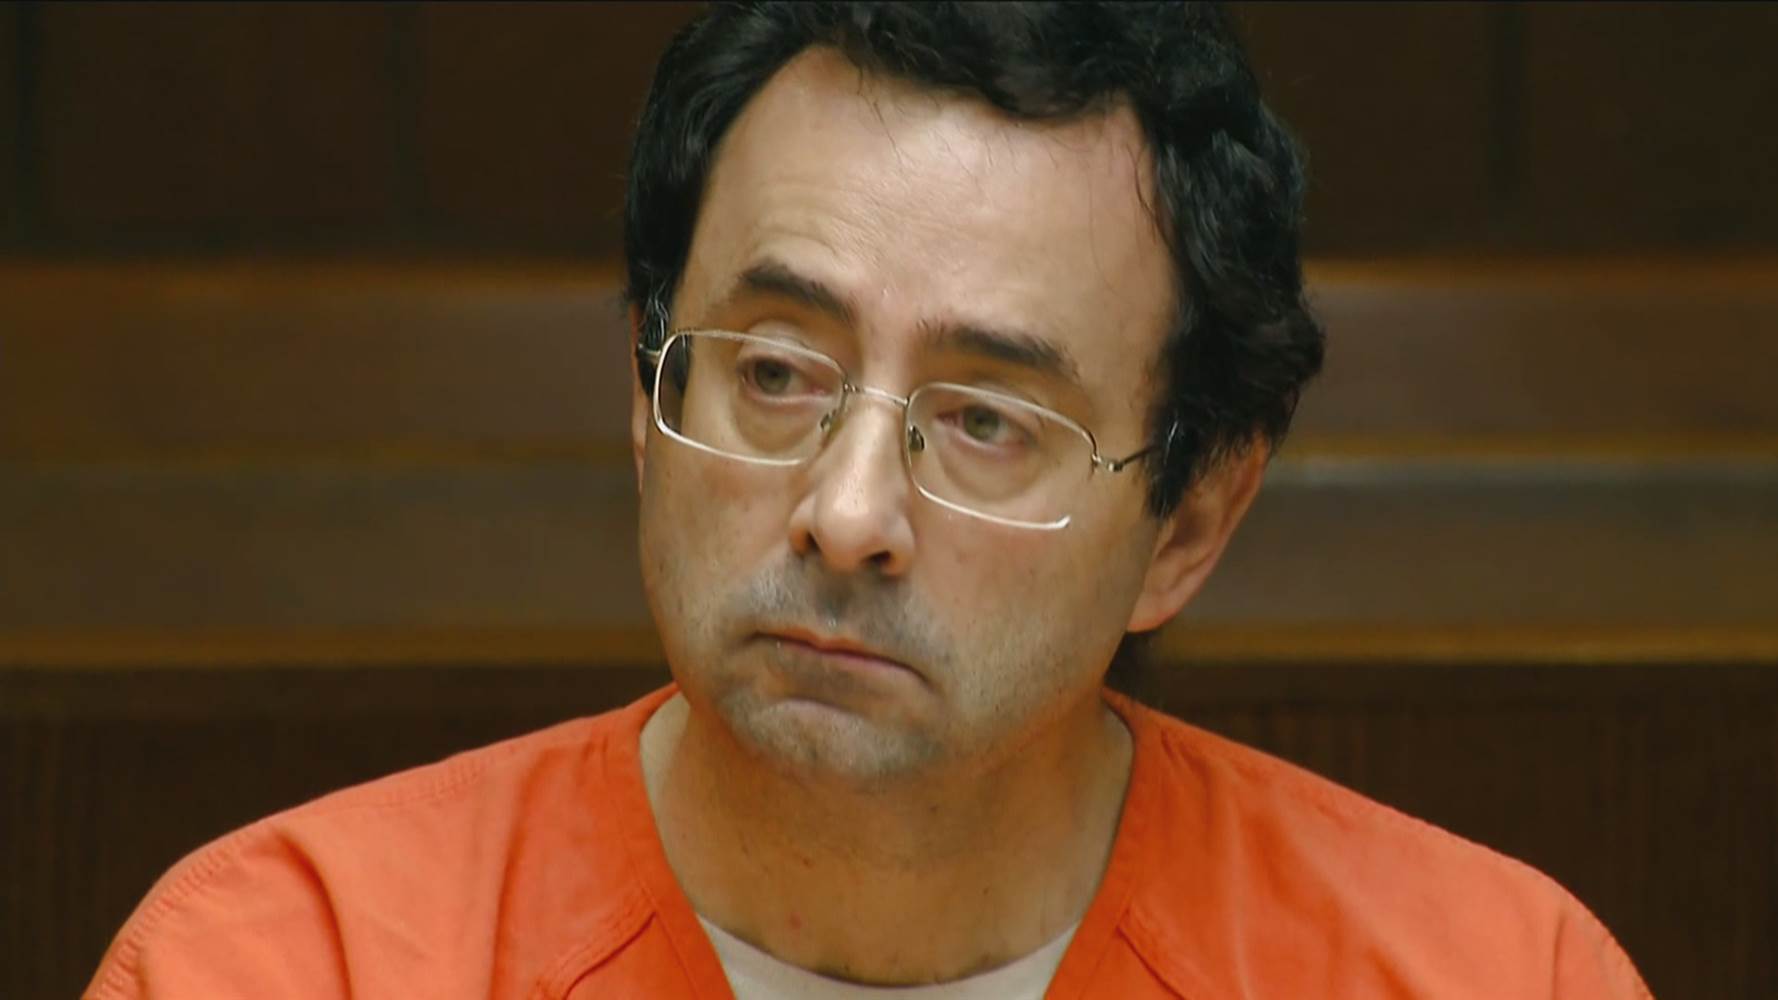 Disgraced Former USA Gymnastics Doctor Sentenced to 60 Years for Child Abuse Images